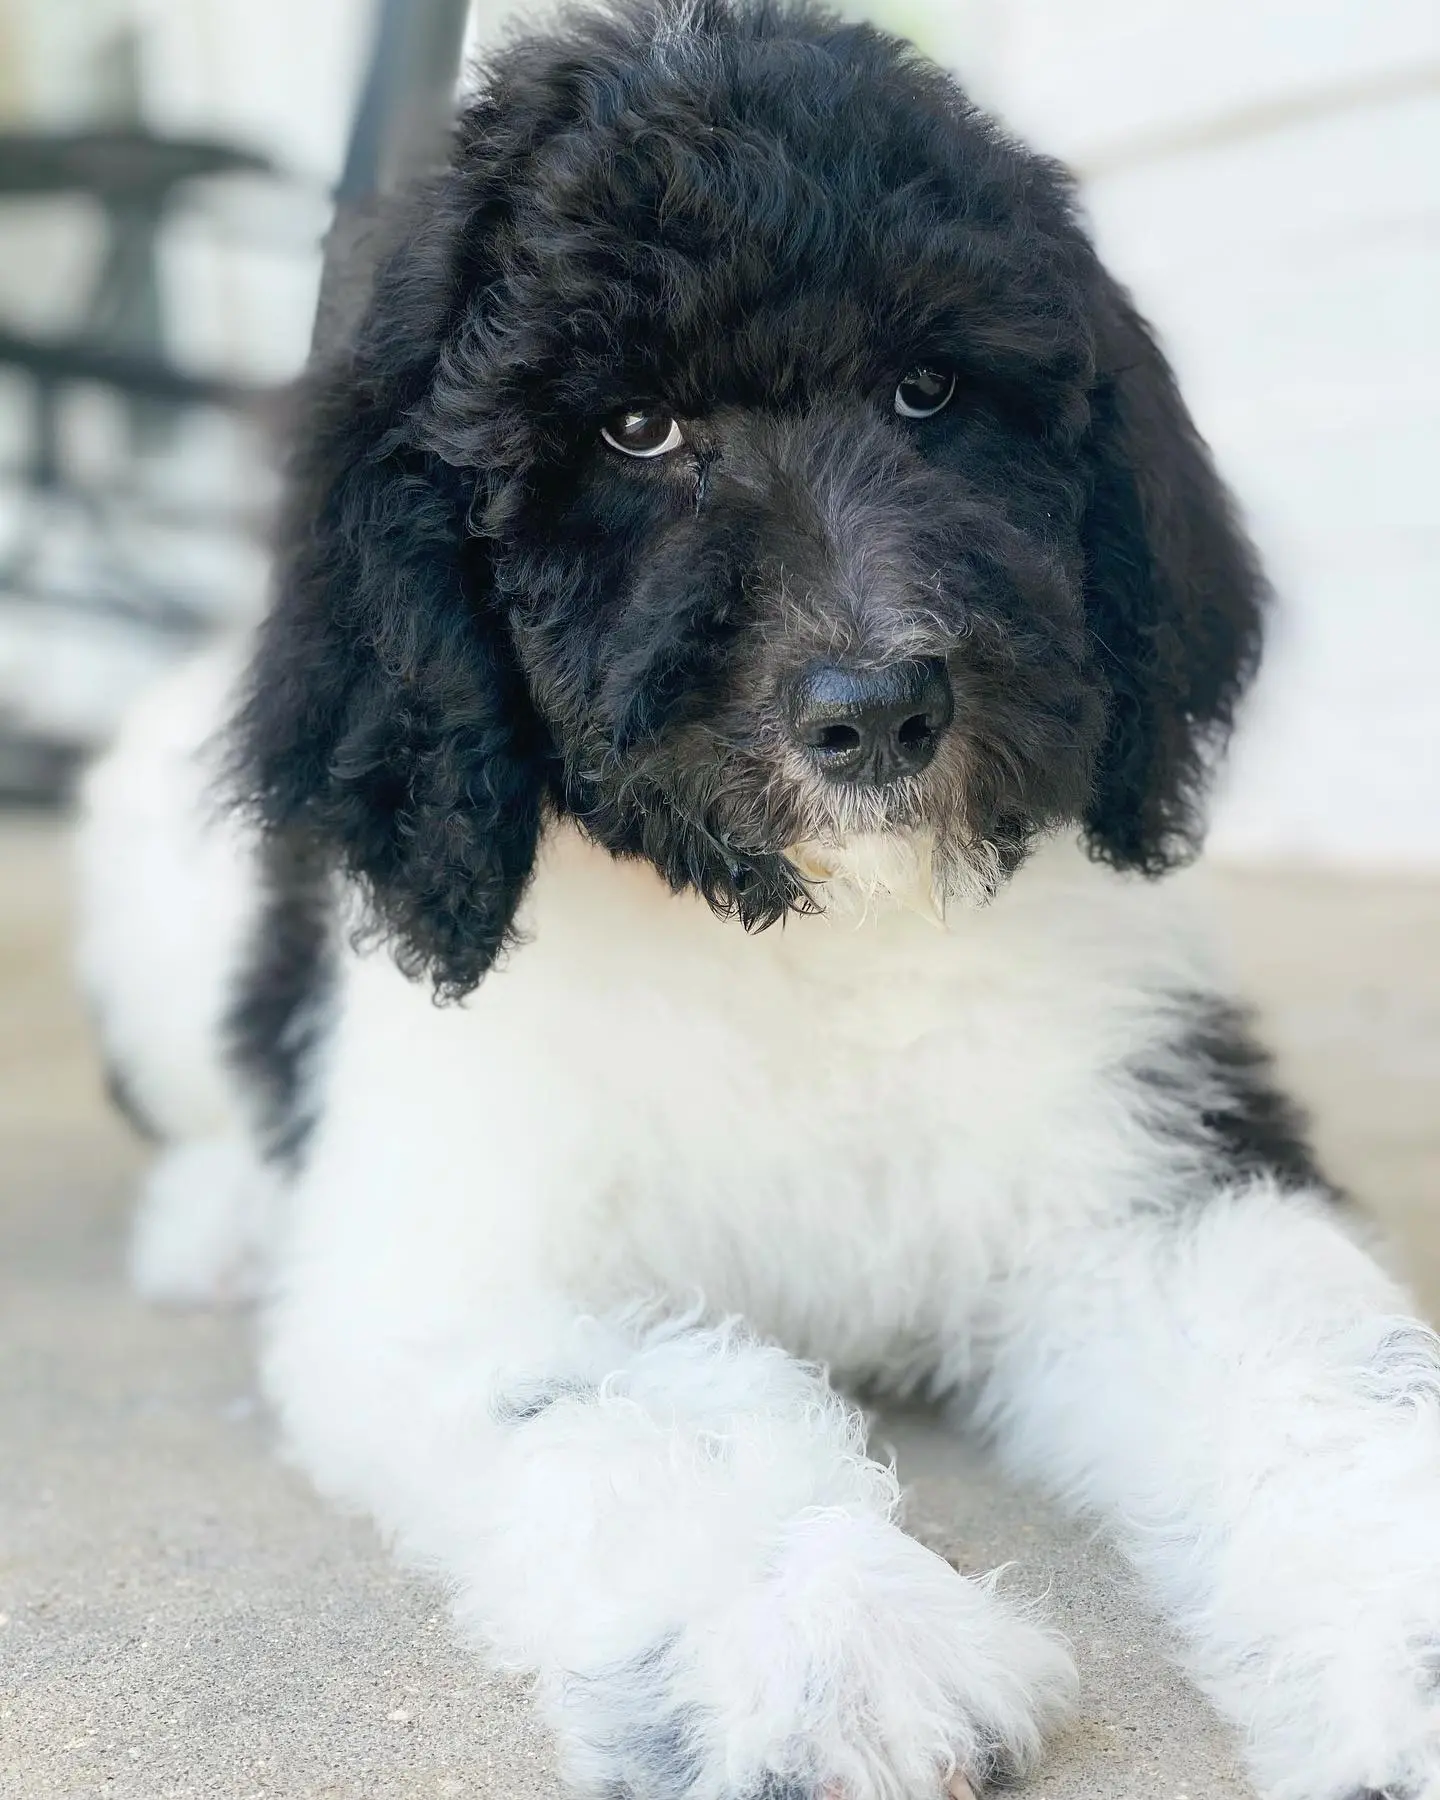 The black and white parti golden doodle is a beautiful dog, and would make a great addition to any family. The coloring of these dogs is so unique and beautiful.